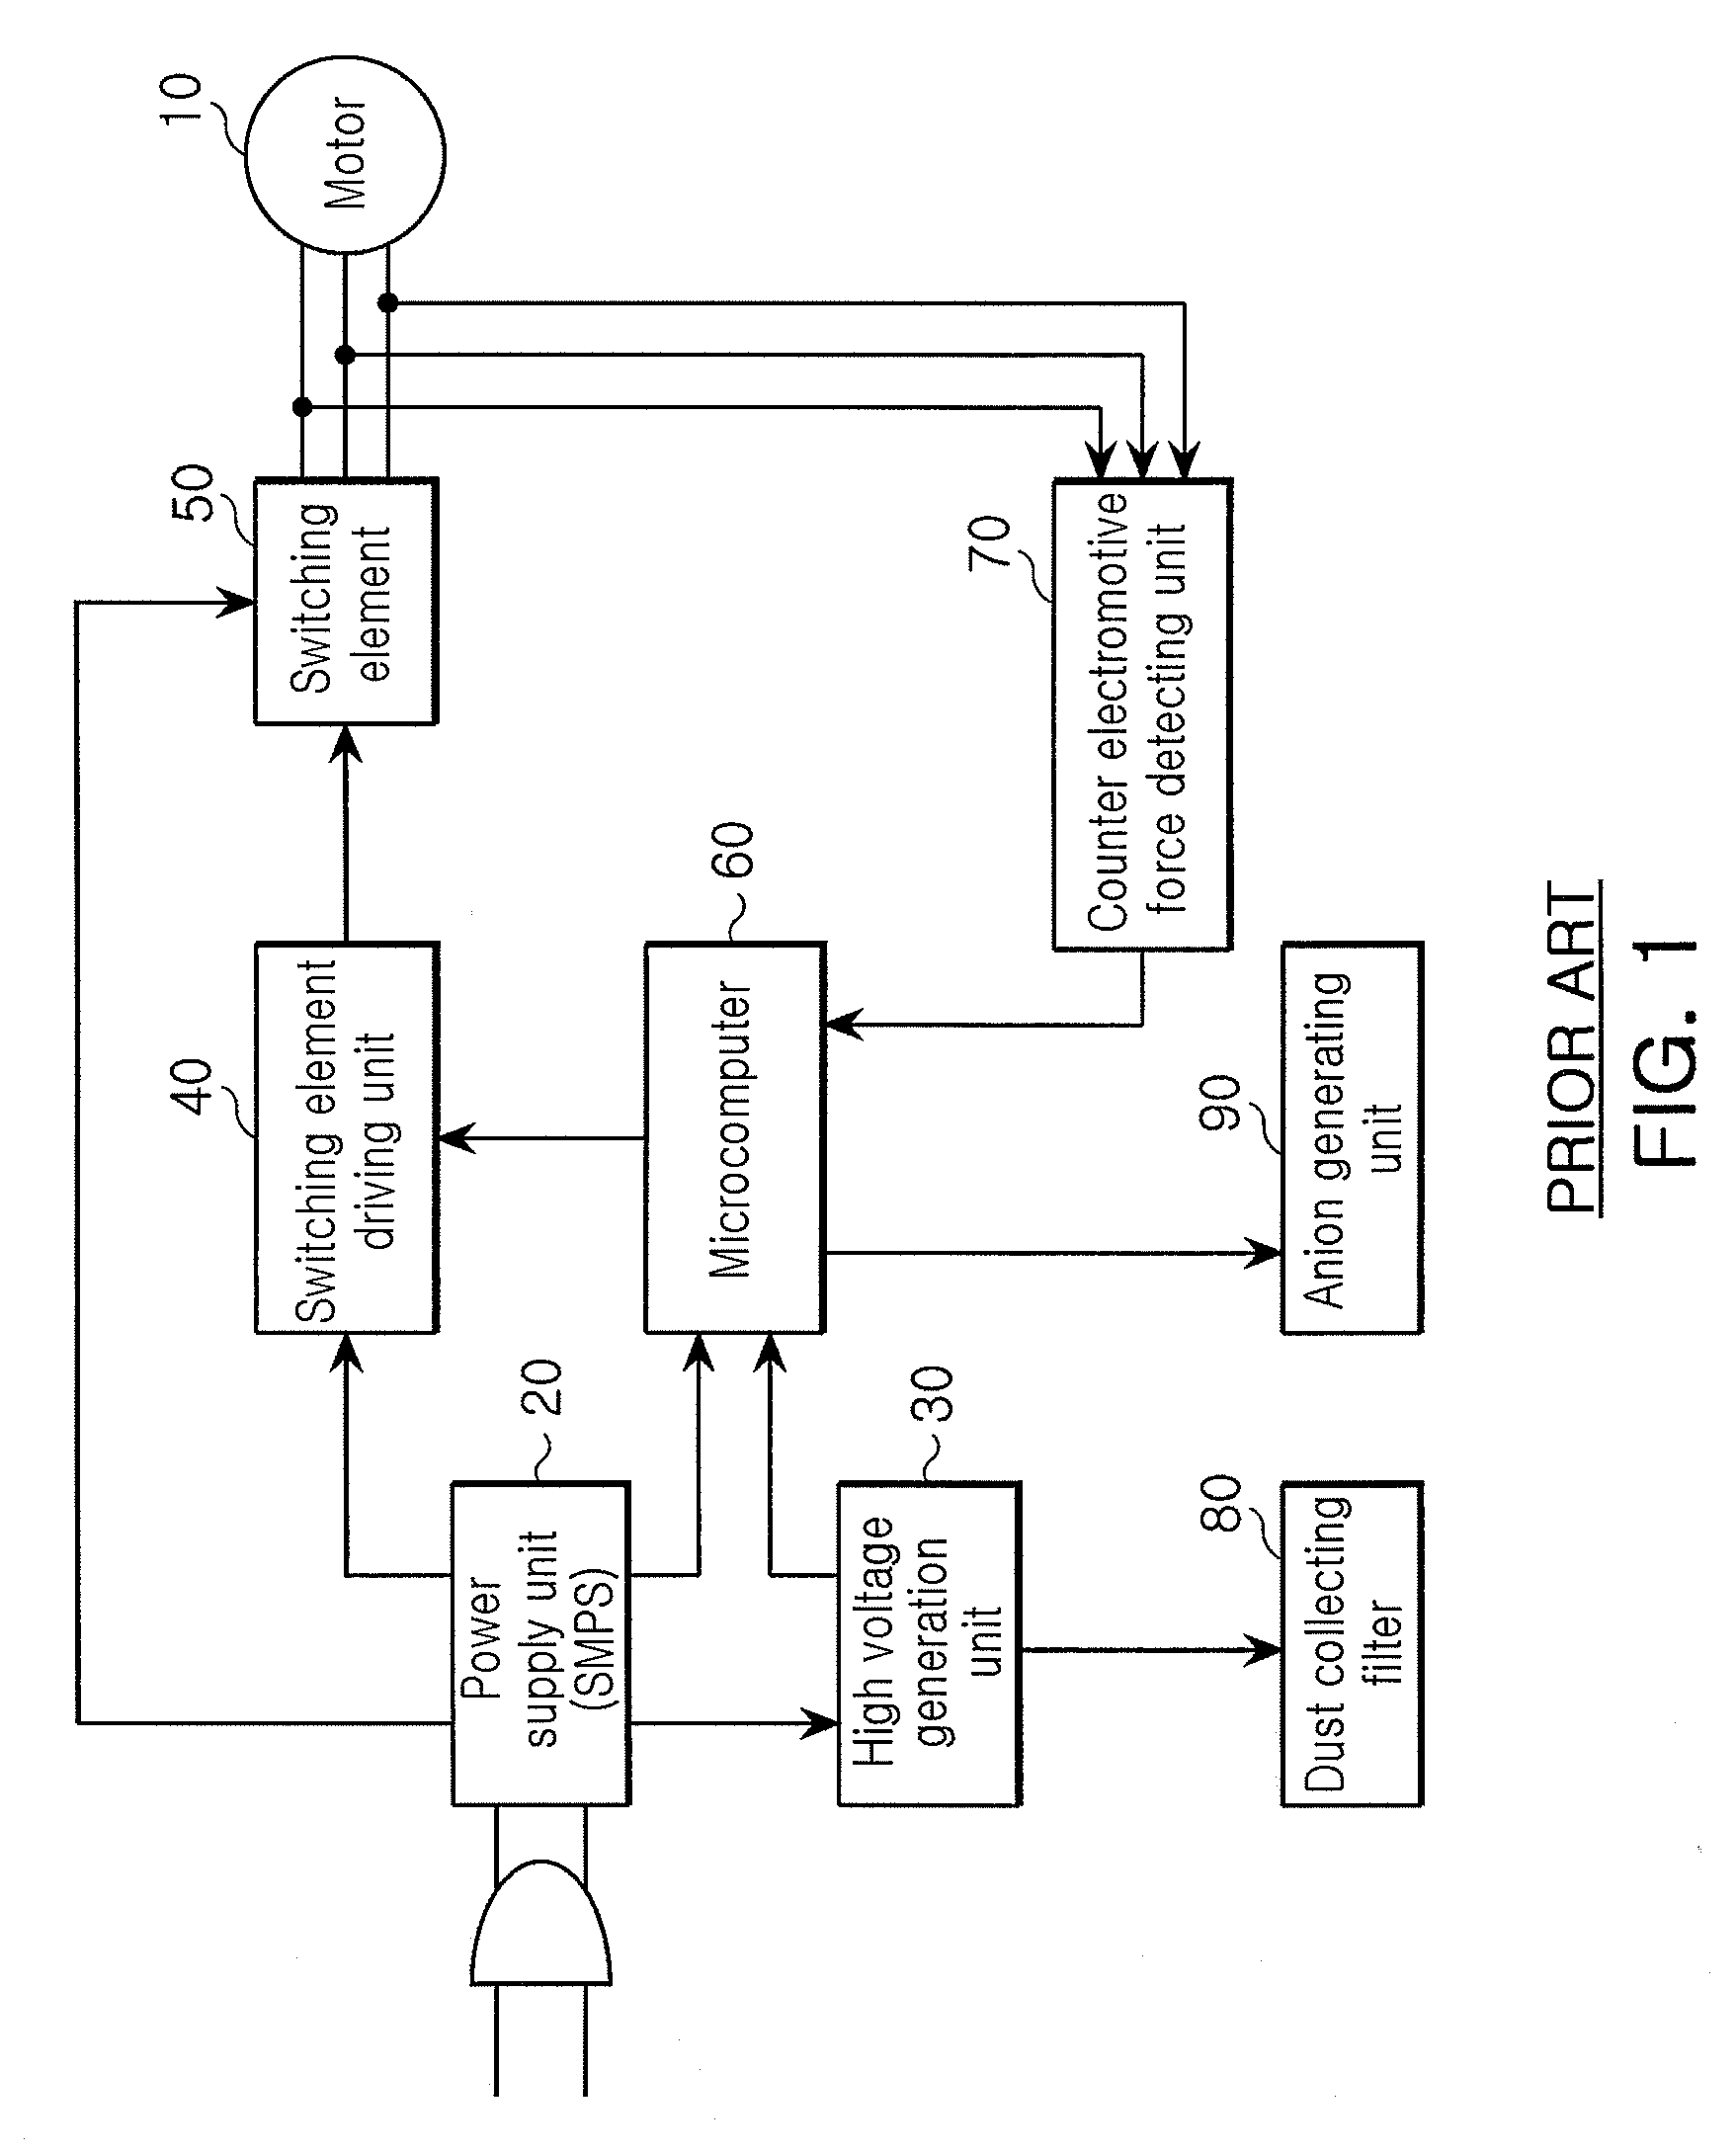 System and method for determining air purifier filter change time using measurement of motor speed